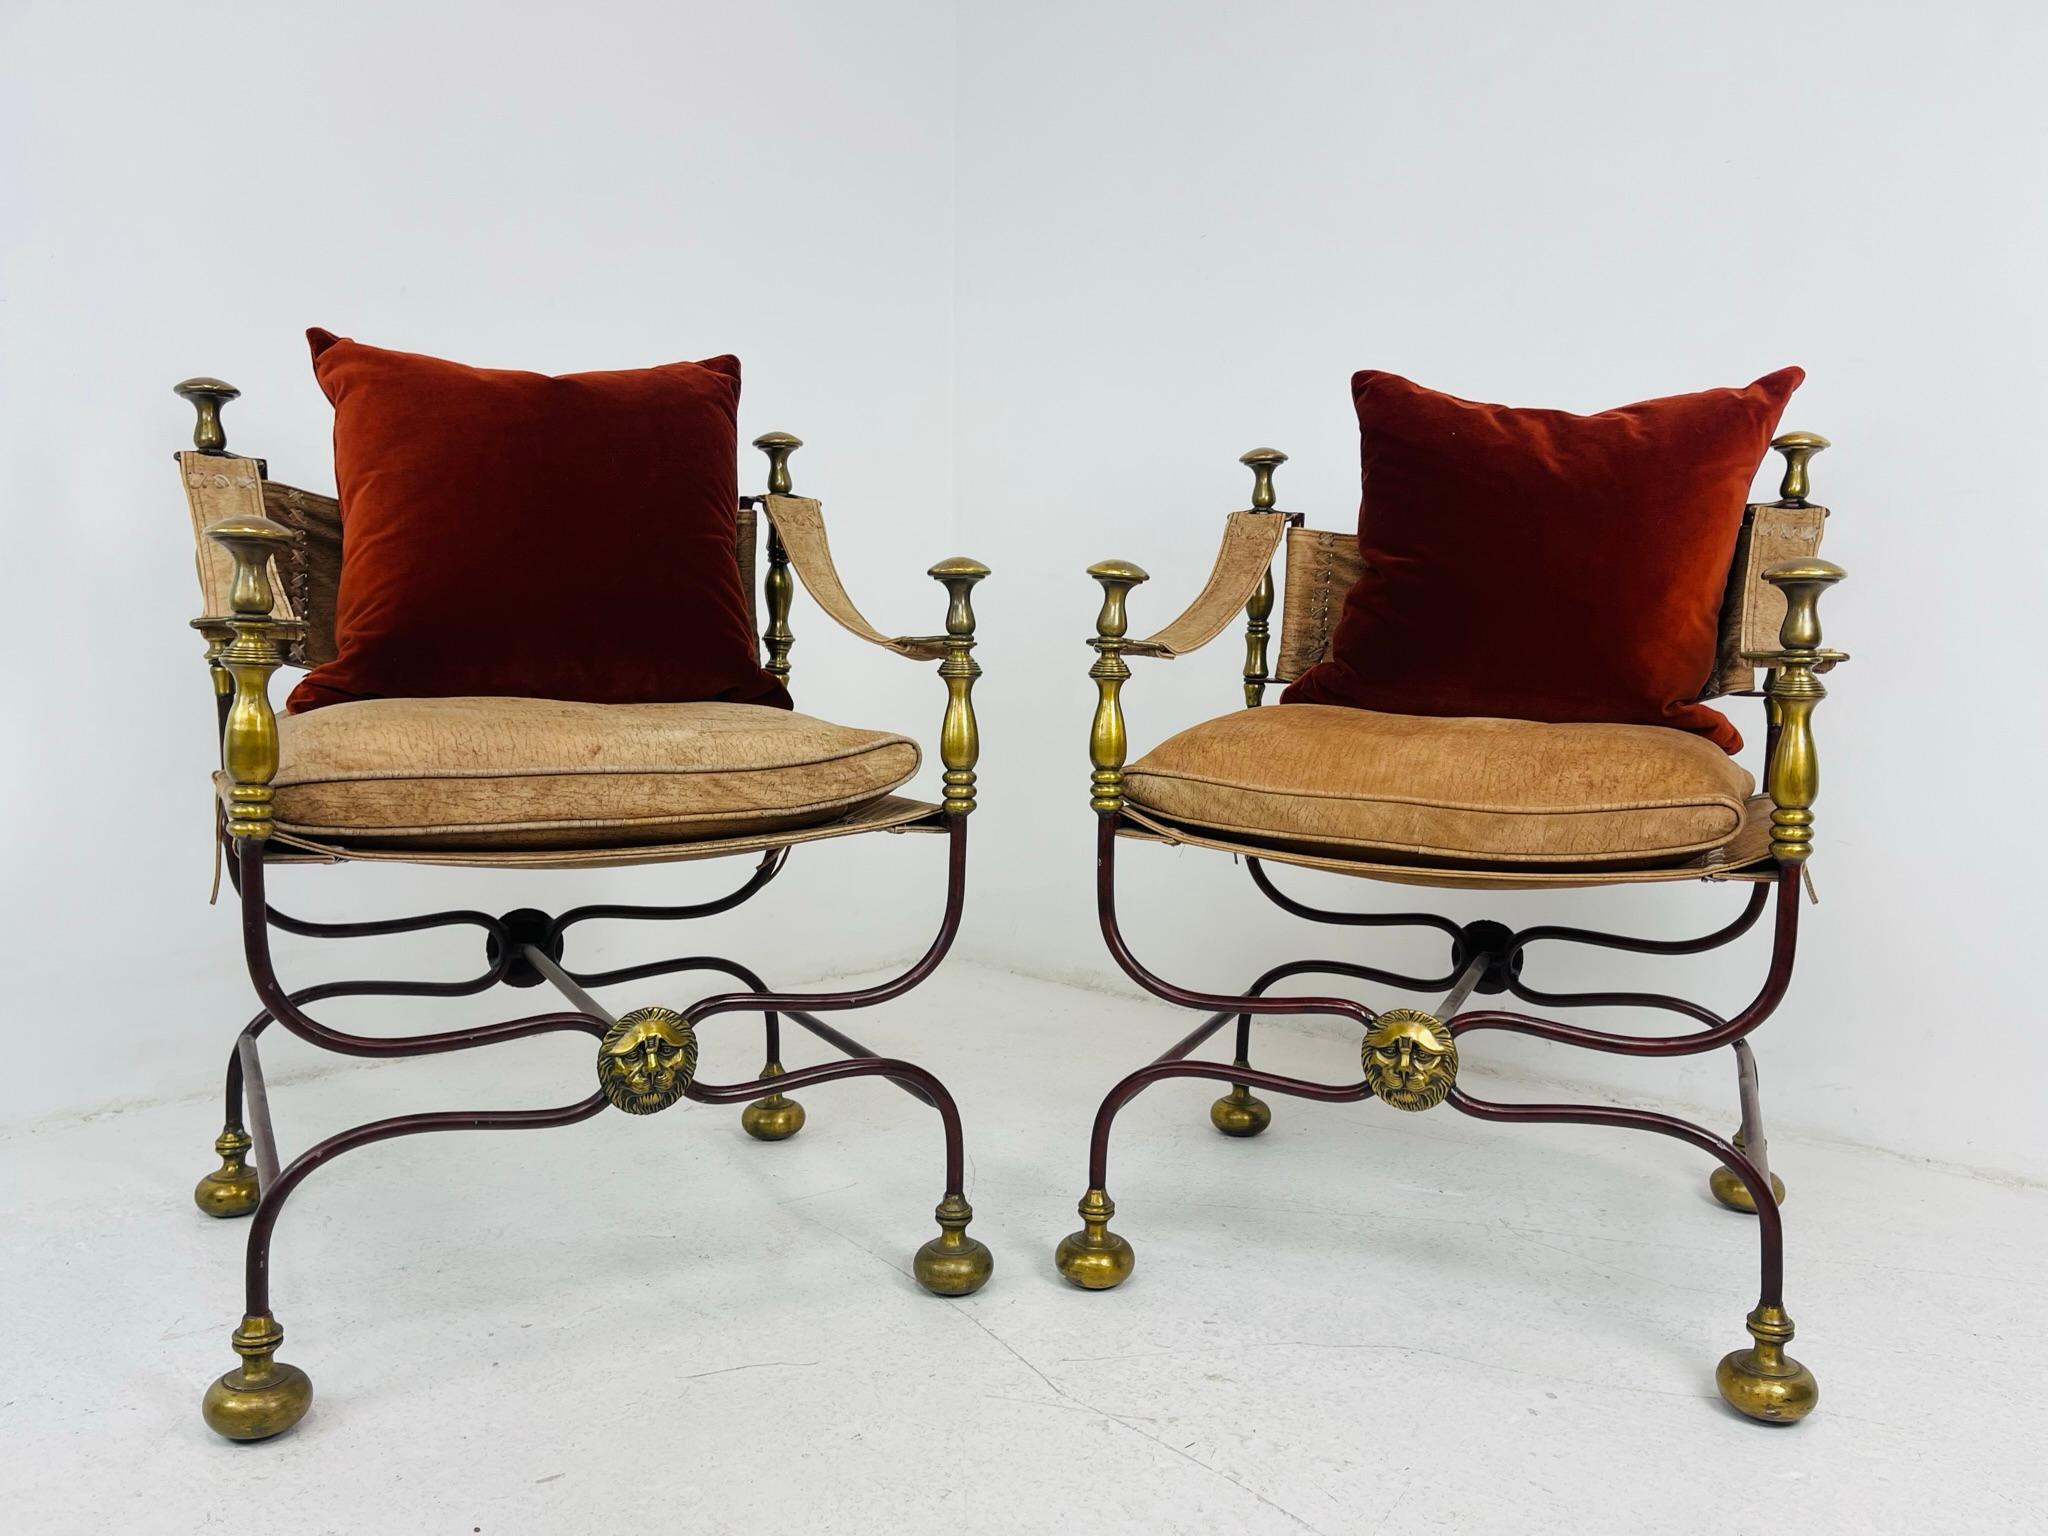 Pair of early 20th century campaign chairs with leather seats, arms and back. Chairs feature wrought iron bases leading to bronze details and feet. Bronze lion medallions adorn the intersection at the front and backside of the chairs. Regal yet